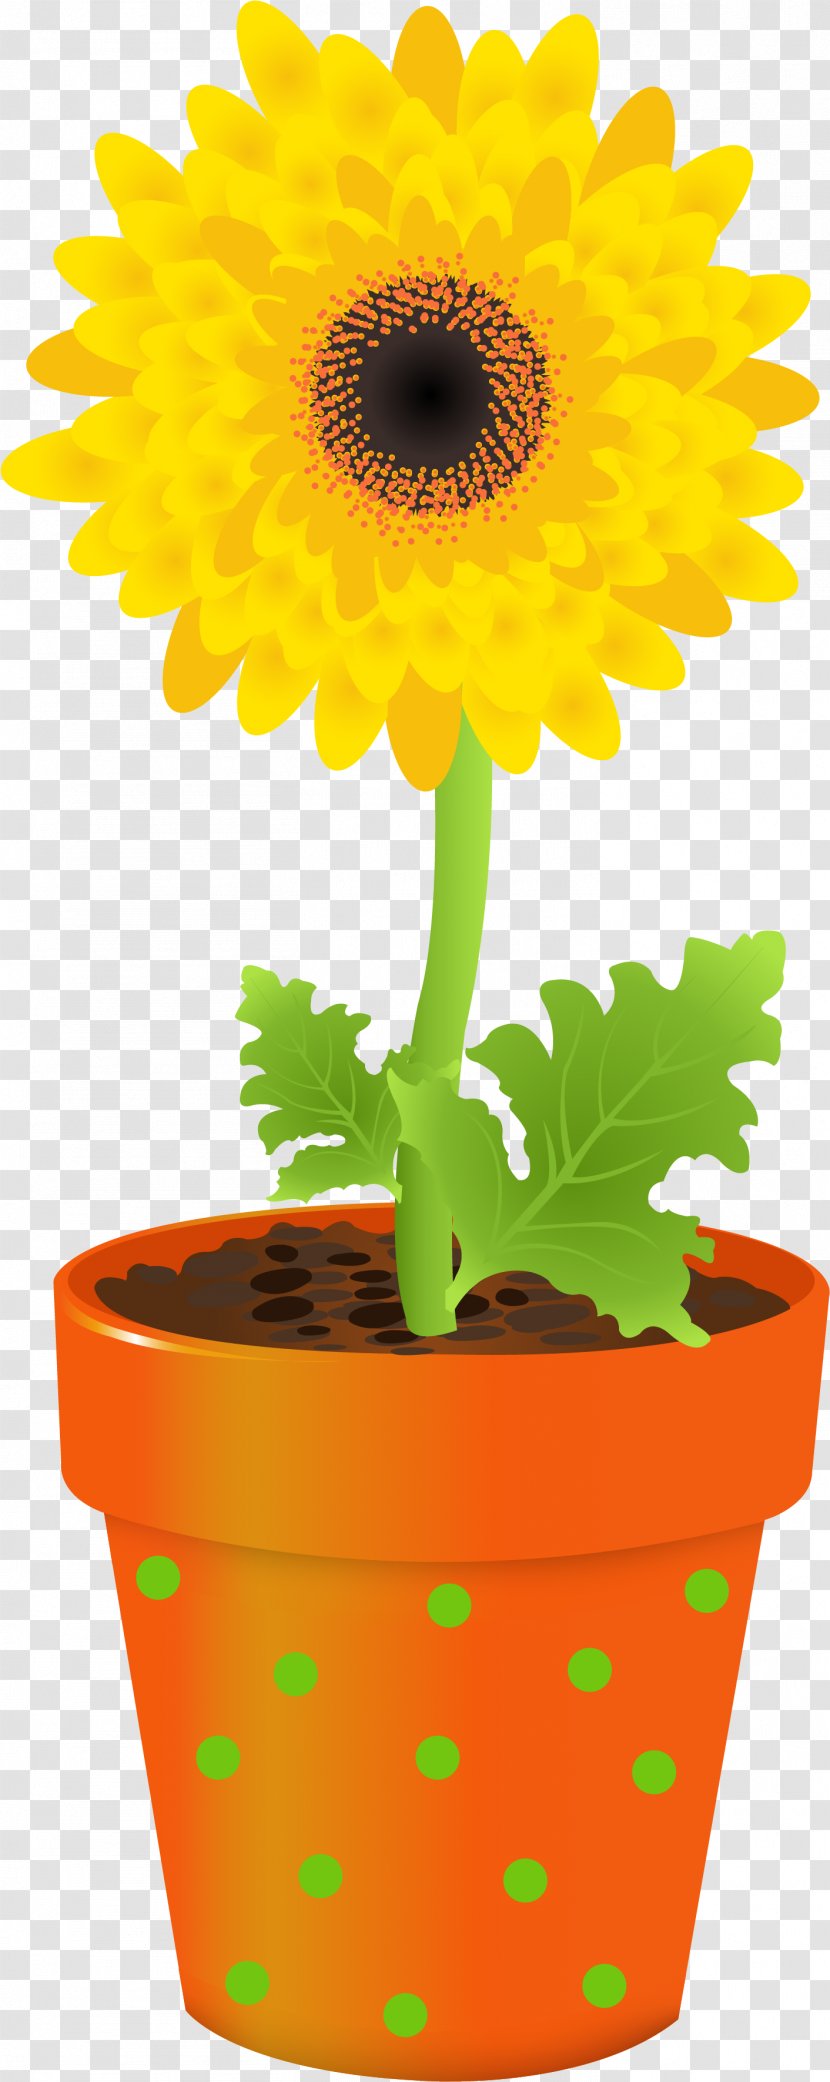 Marigold Flower - Daisy Family - Sunflower Seed Transparent PNG